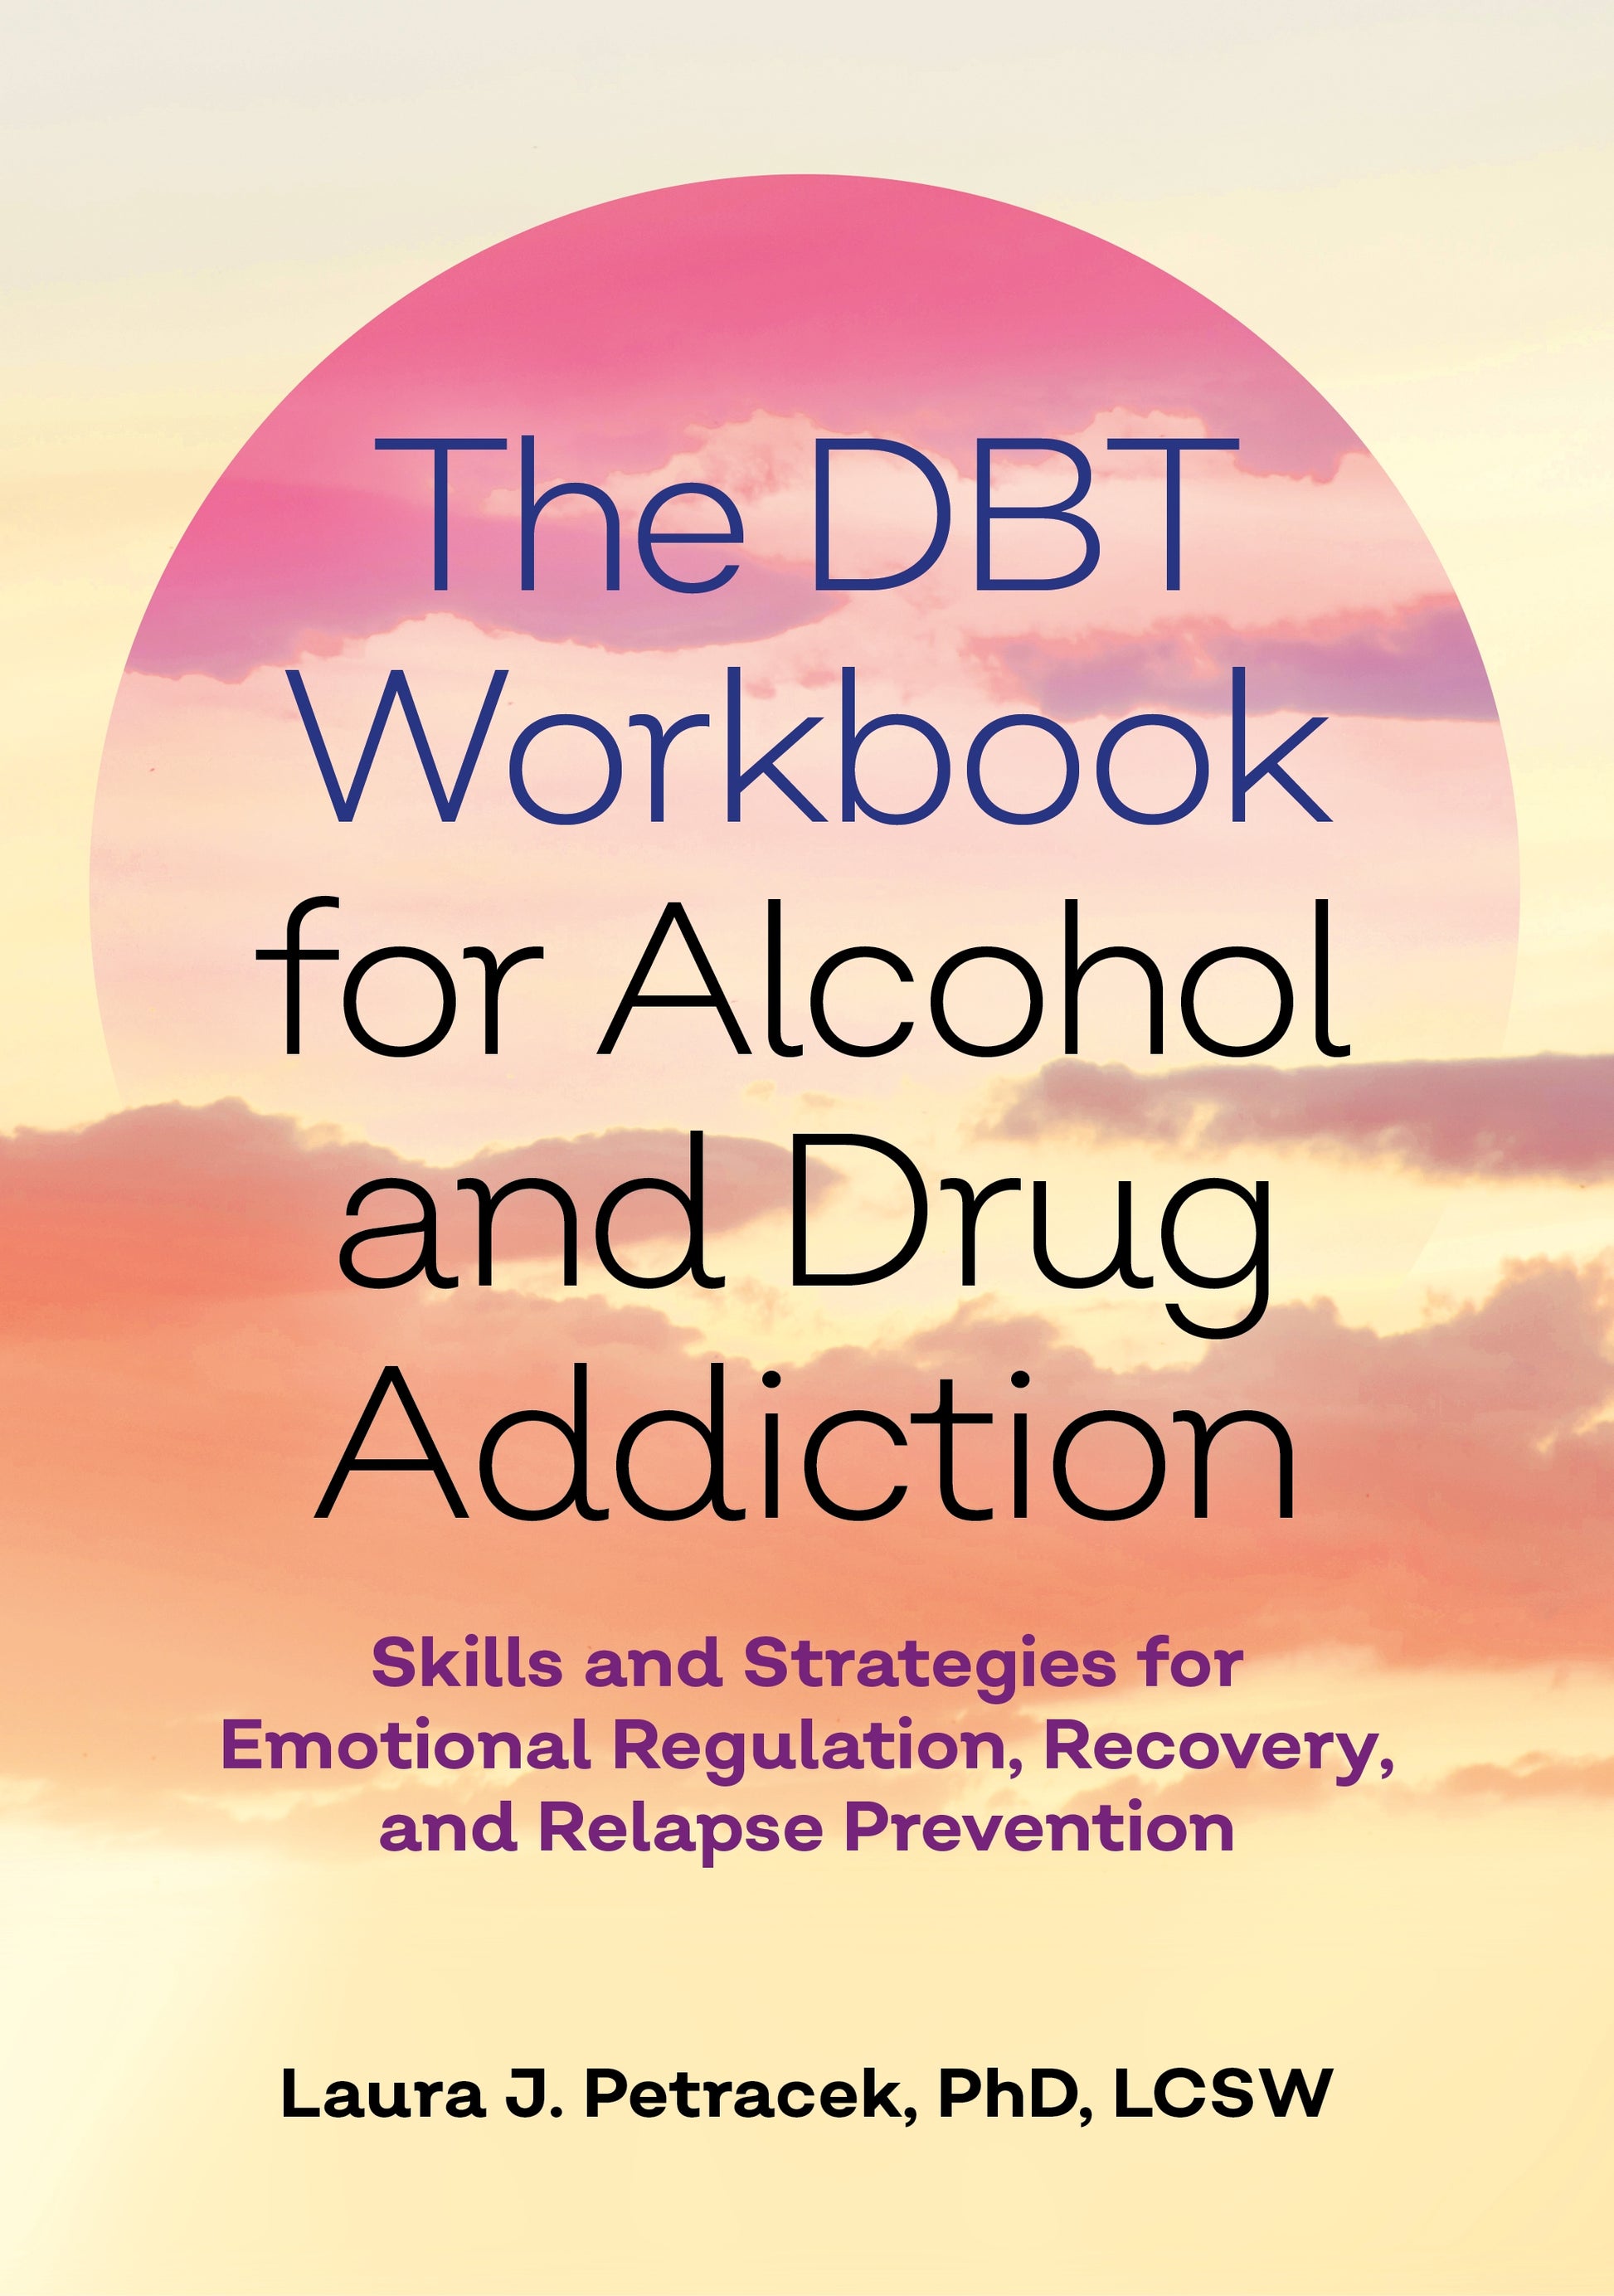 The DBT Workbook for Alcohol and Drug Addiction by Gillian Galen, PsyD, Laura J. Petracek